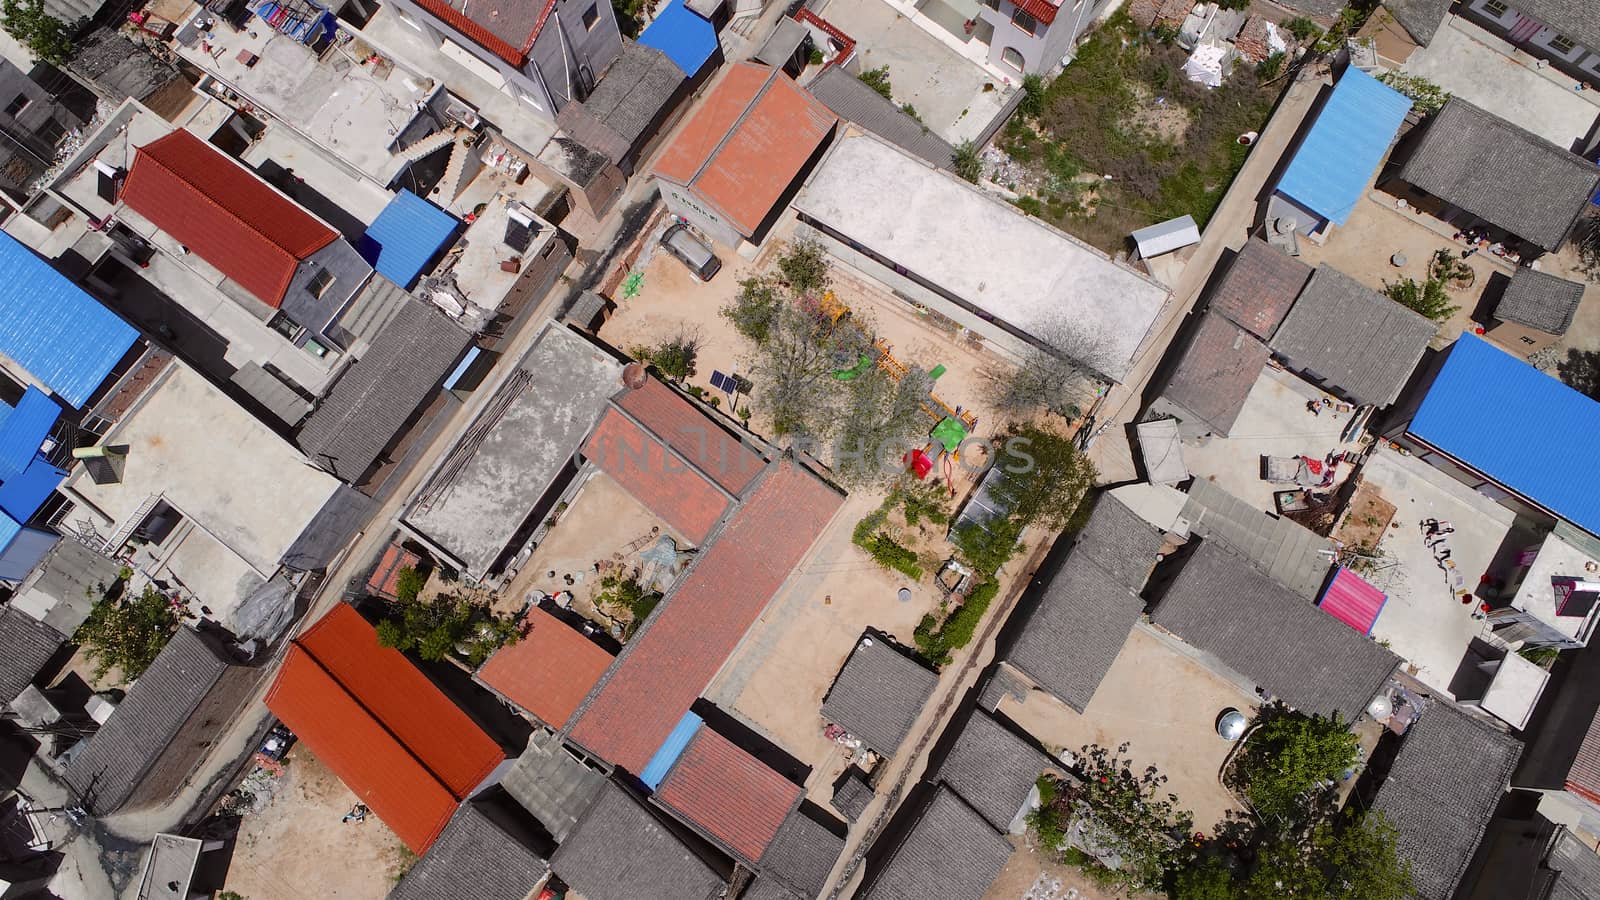 Aerial top view of small poor town houses in Gansu region, China